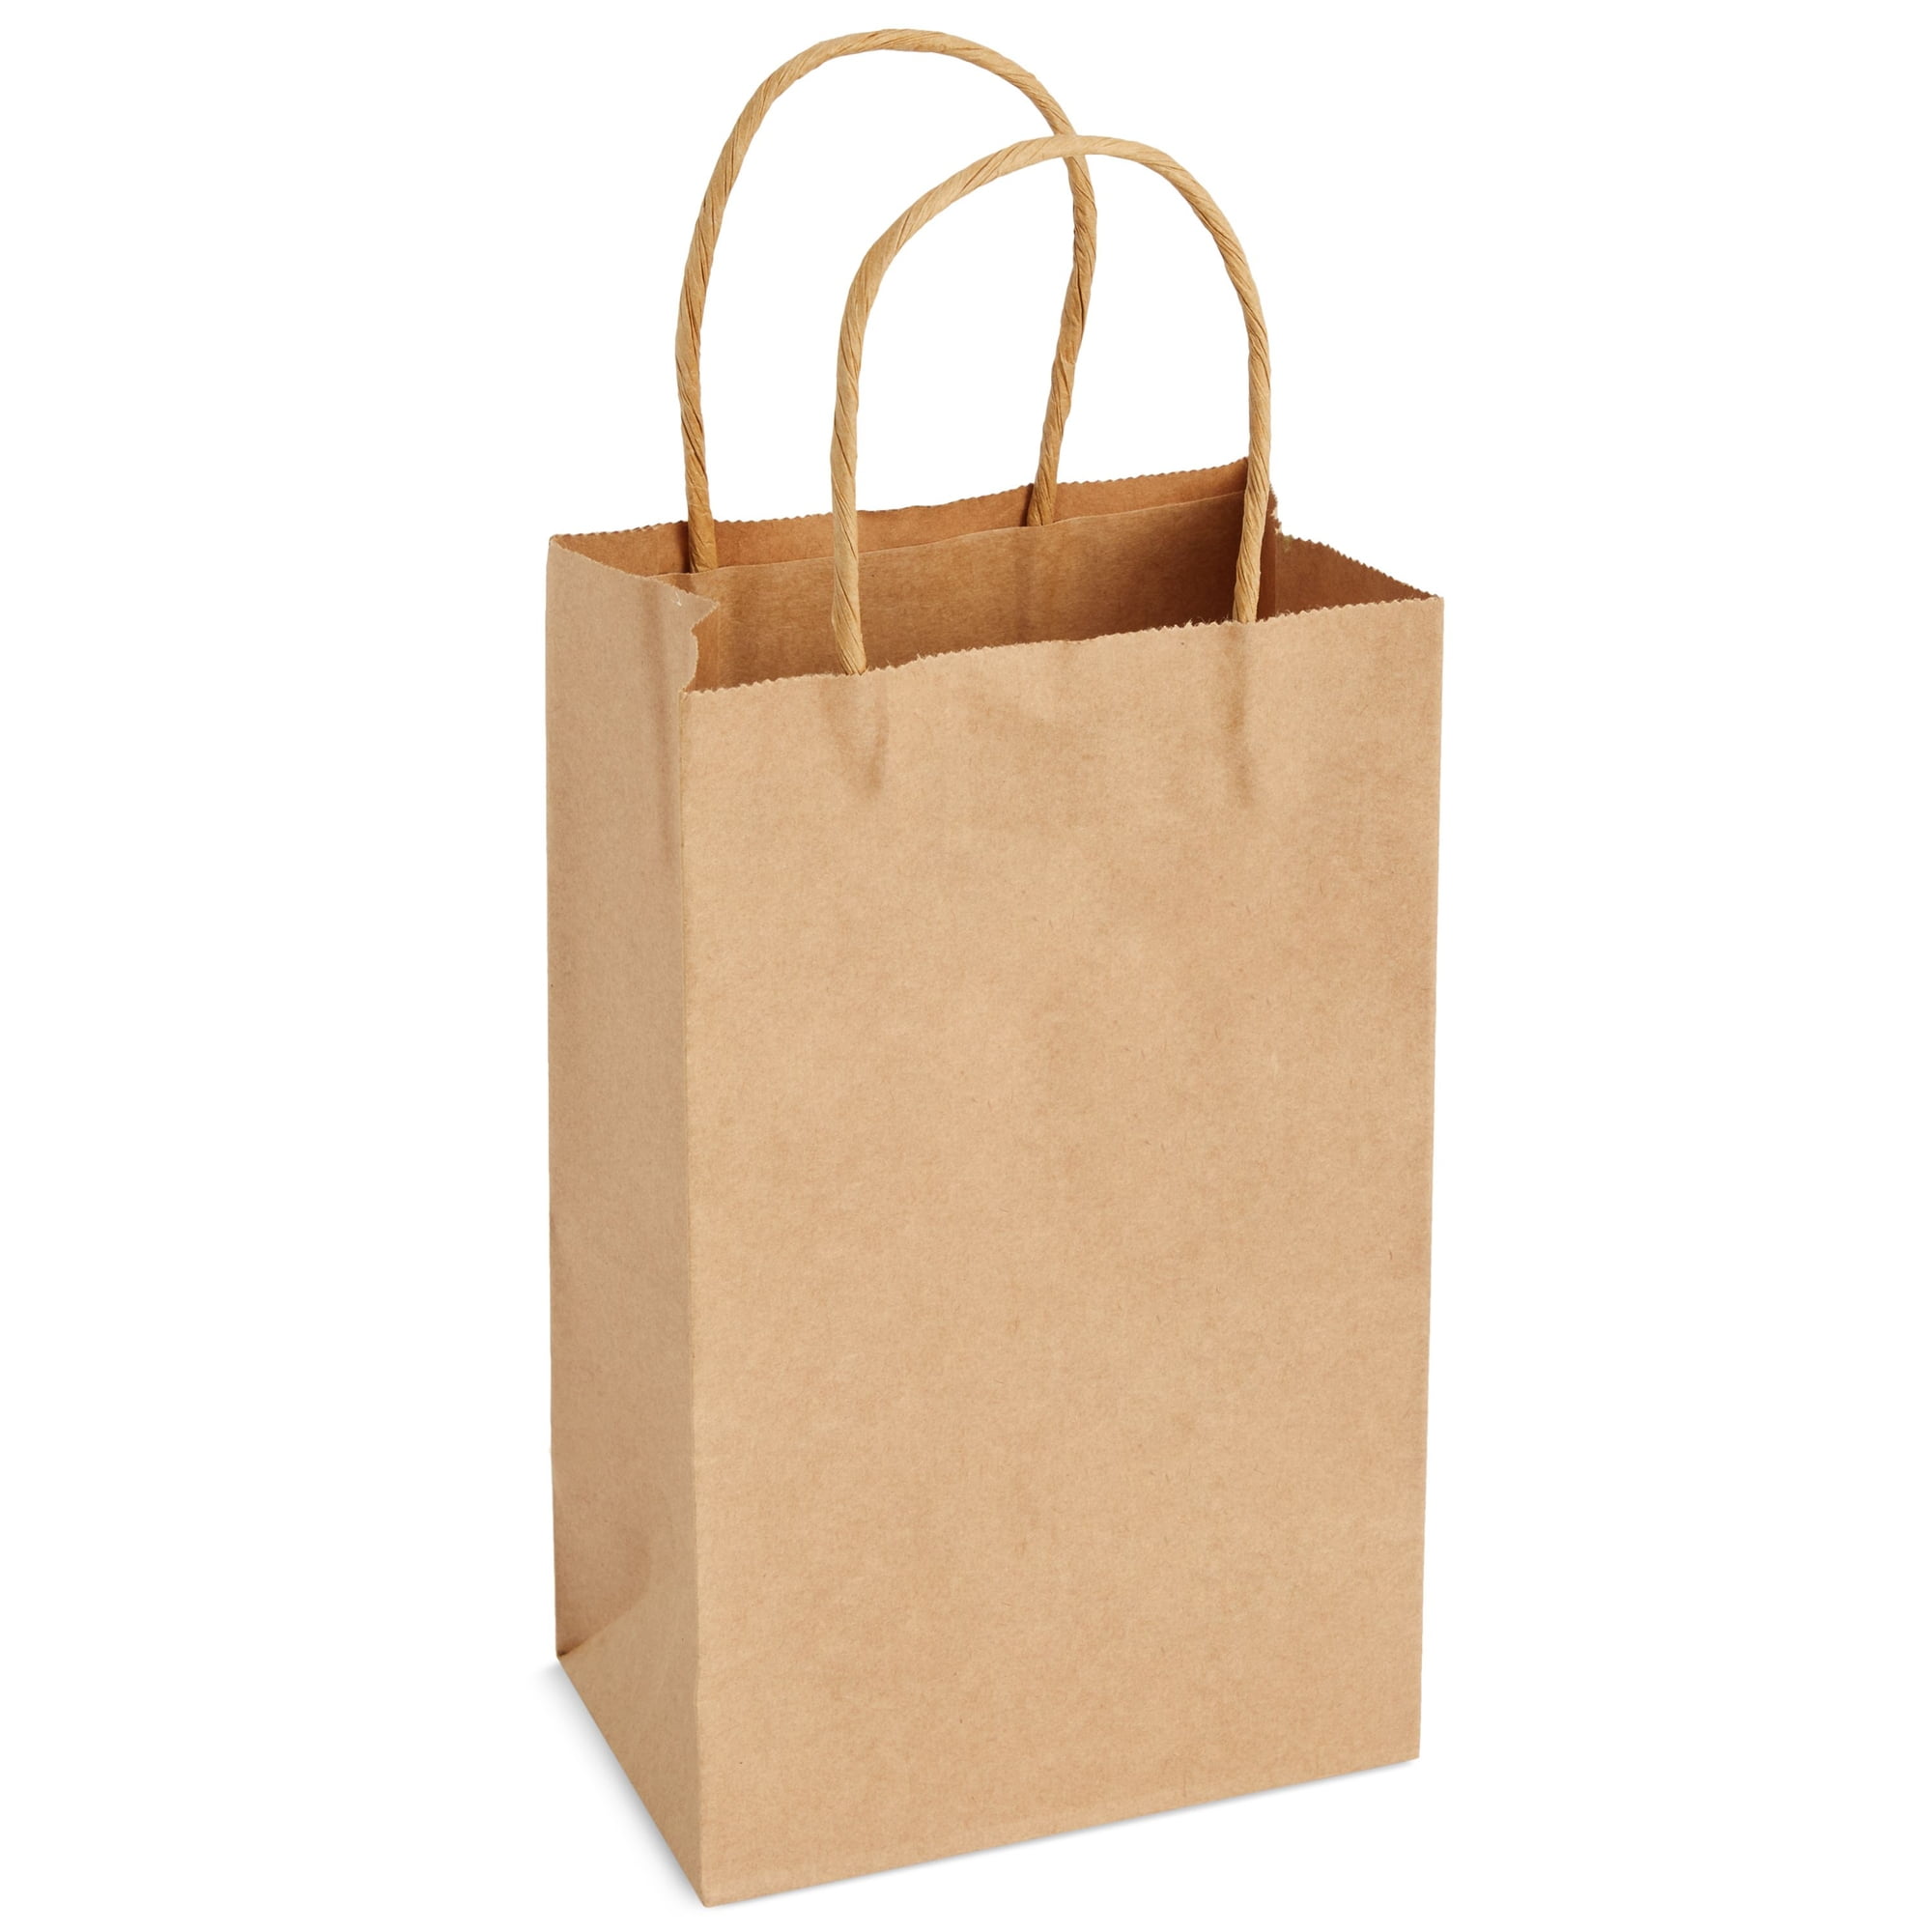 Kraft Brown Bulk Paper Bags with Handles (250 Pcs) 5.75”x3.25”x8.5” Perfect  for Shopping, Grocery, Gifting, Wedding, Party Favor, Craft Merchandise 